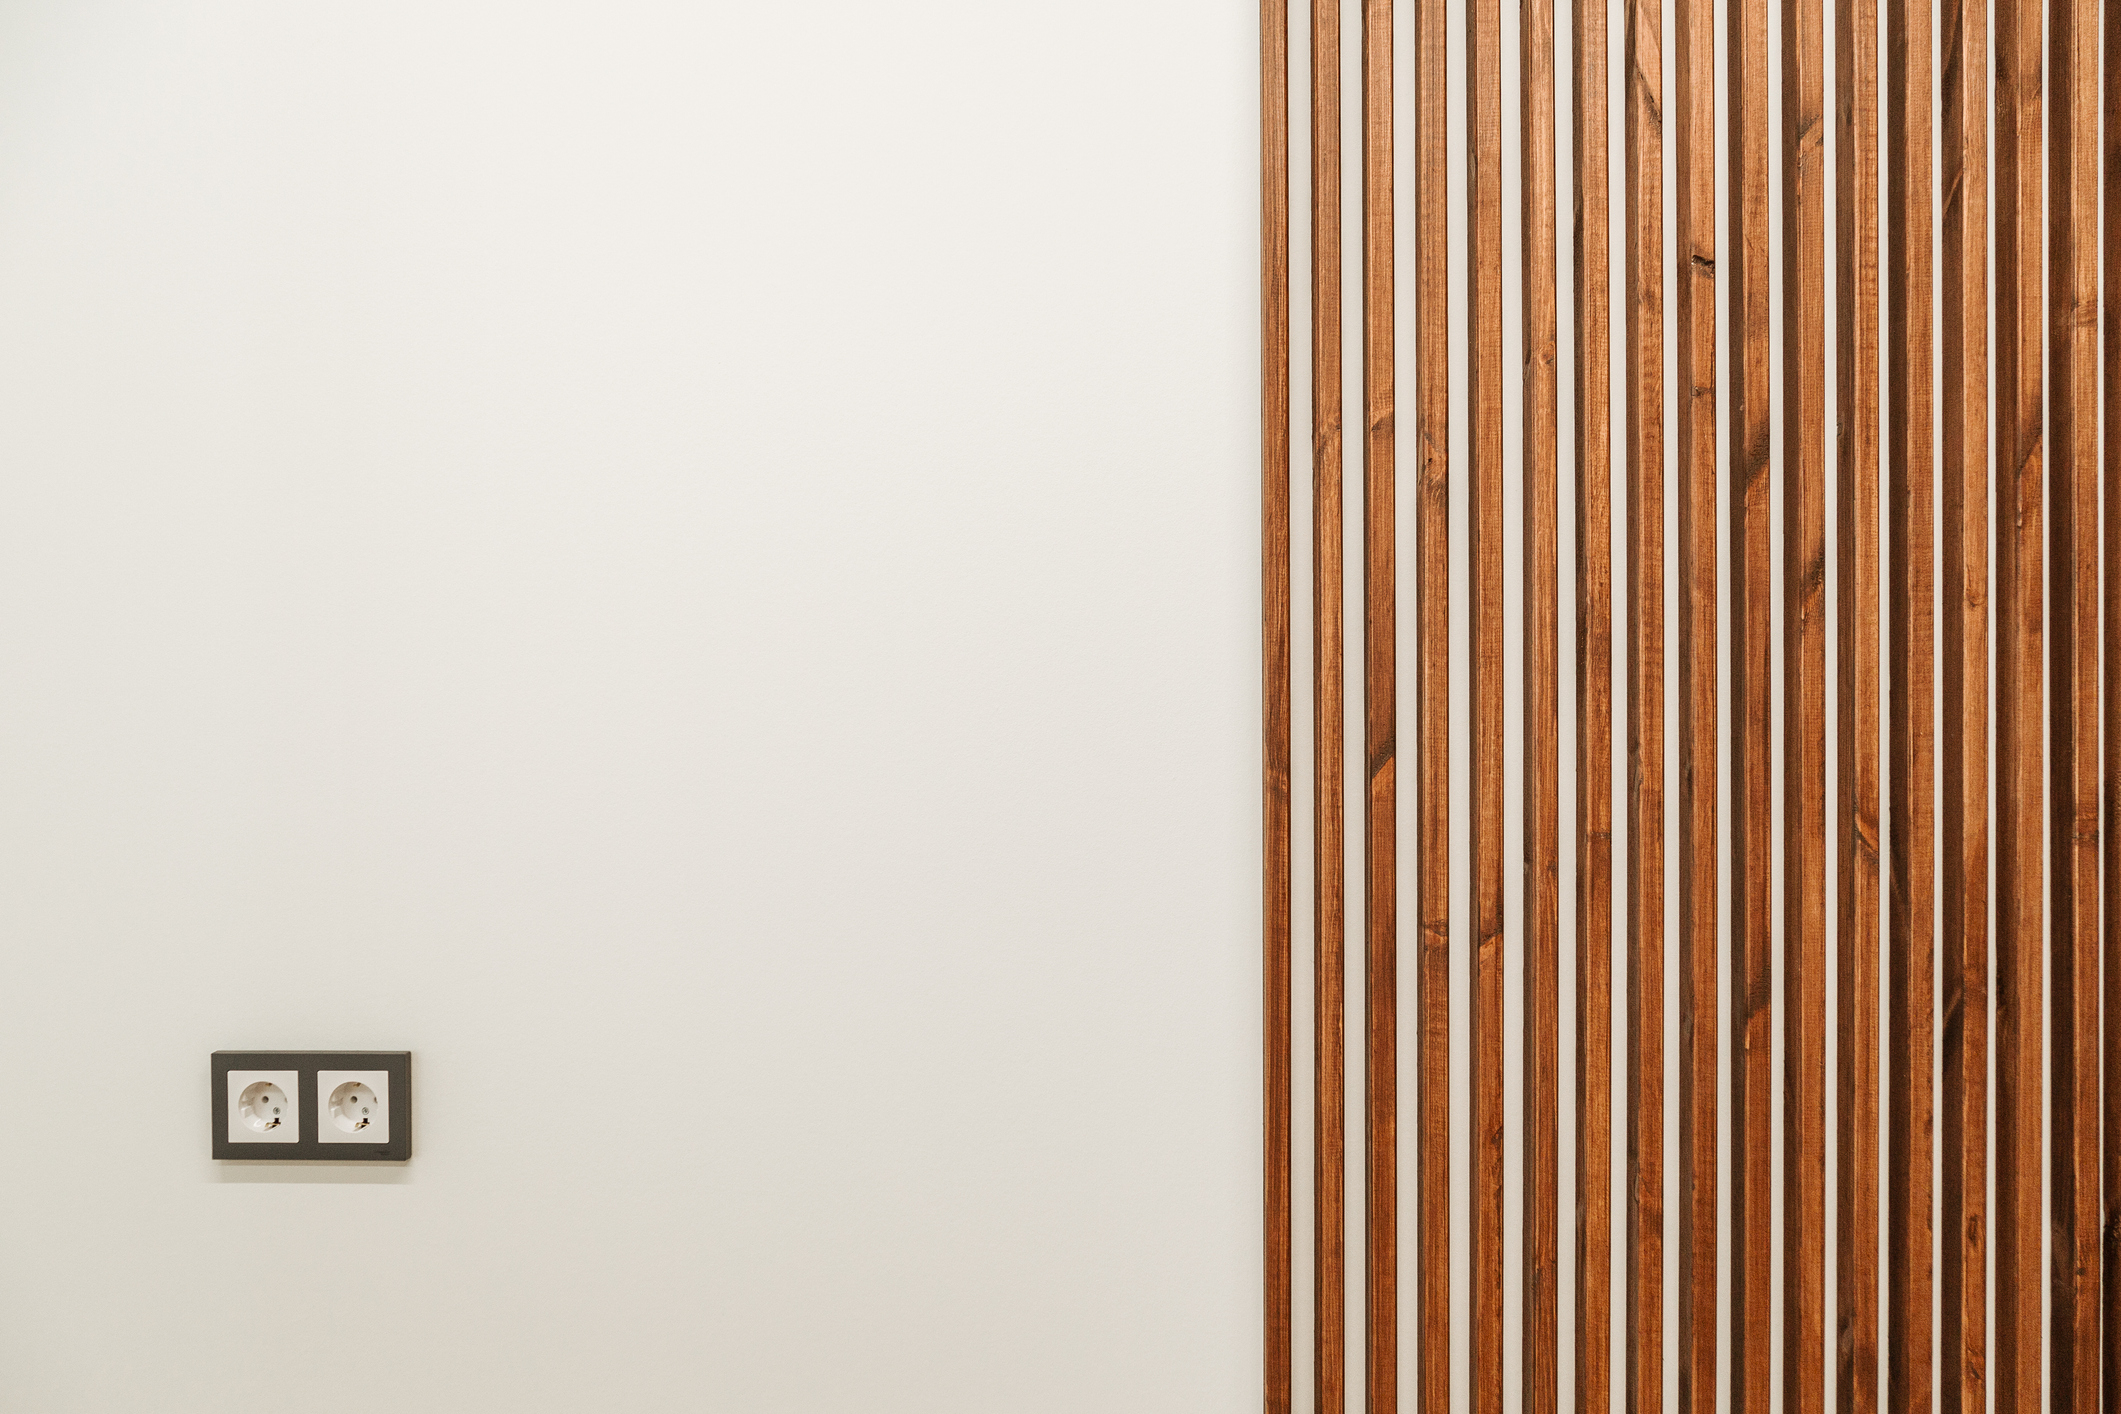 Minimalist interior with a wooden slat wall and a double electrical outlet on a plain wall